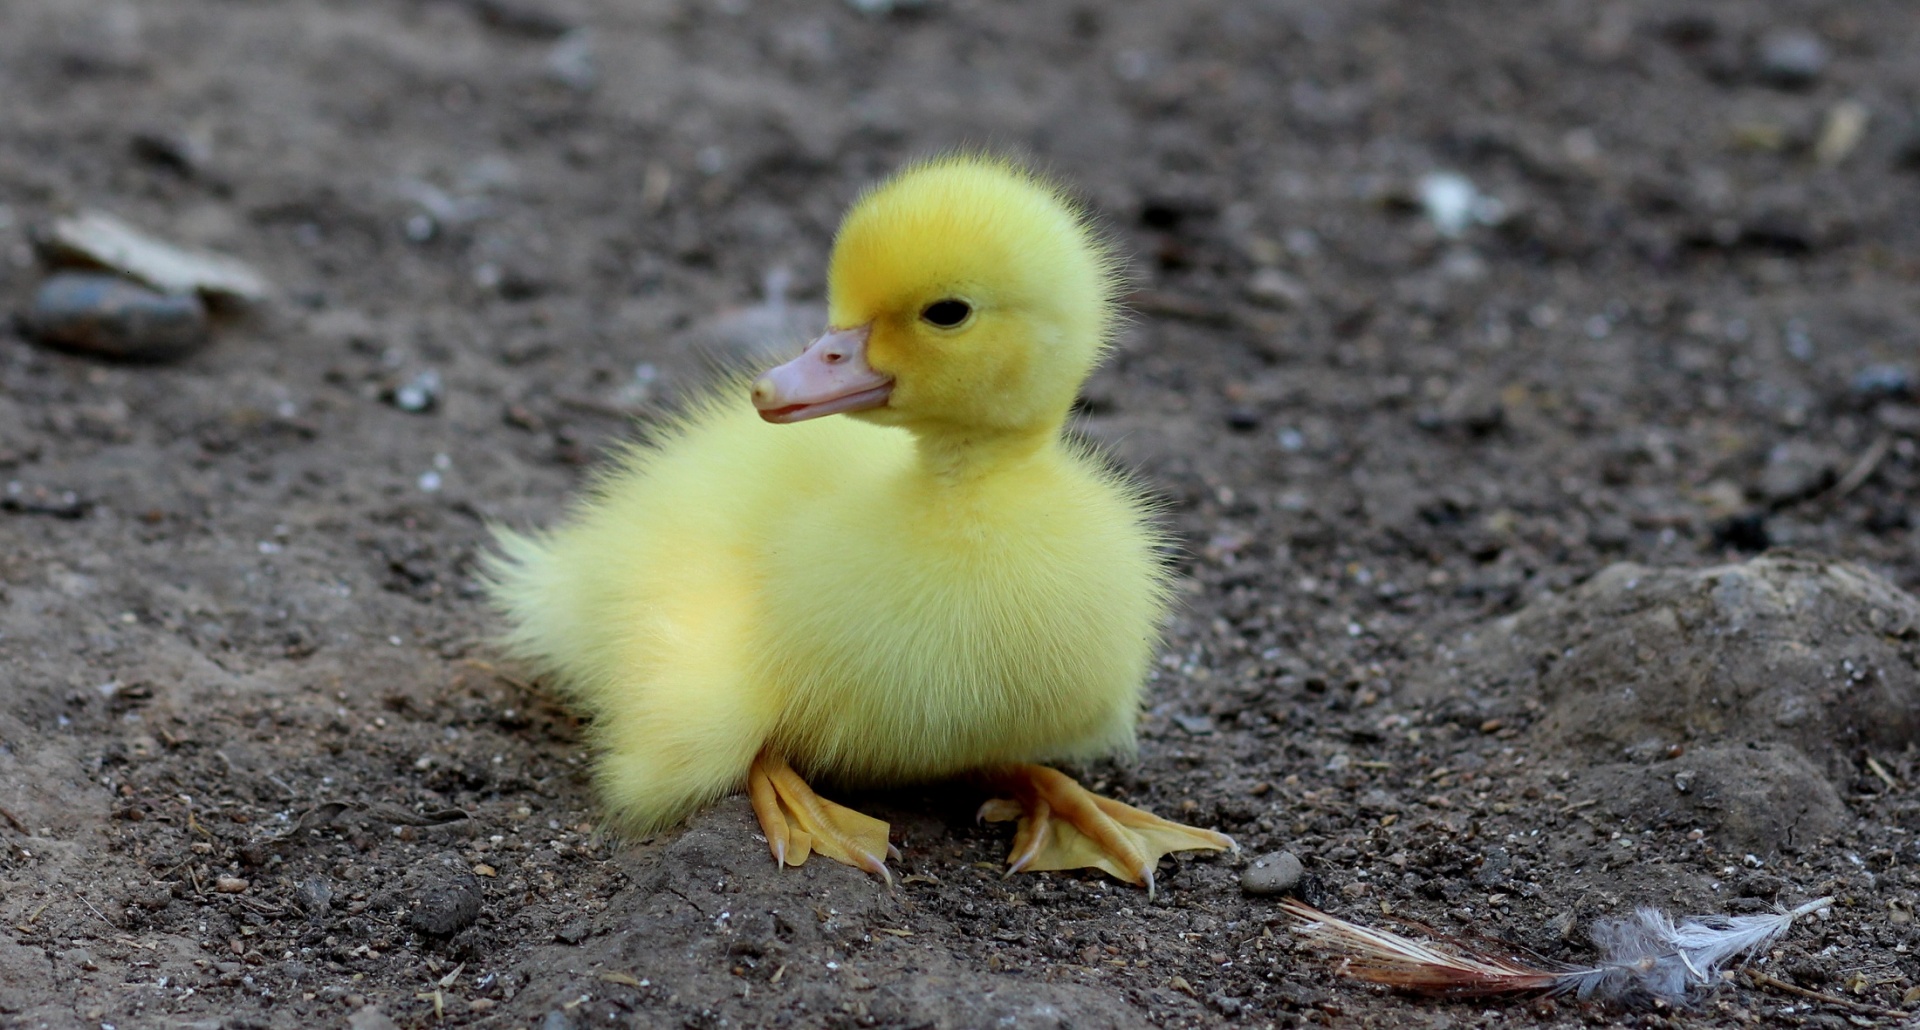 duck,duckling,baby,young,cute,bird,public domain,wallpaper,background,yellow,wildlife,nature,looking,duckling,free pictures, free photos, free images, royalty free, free illustrations, public domain